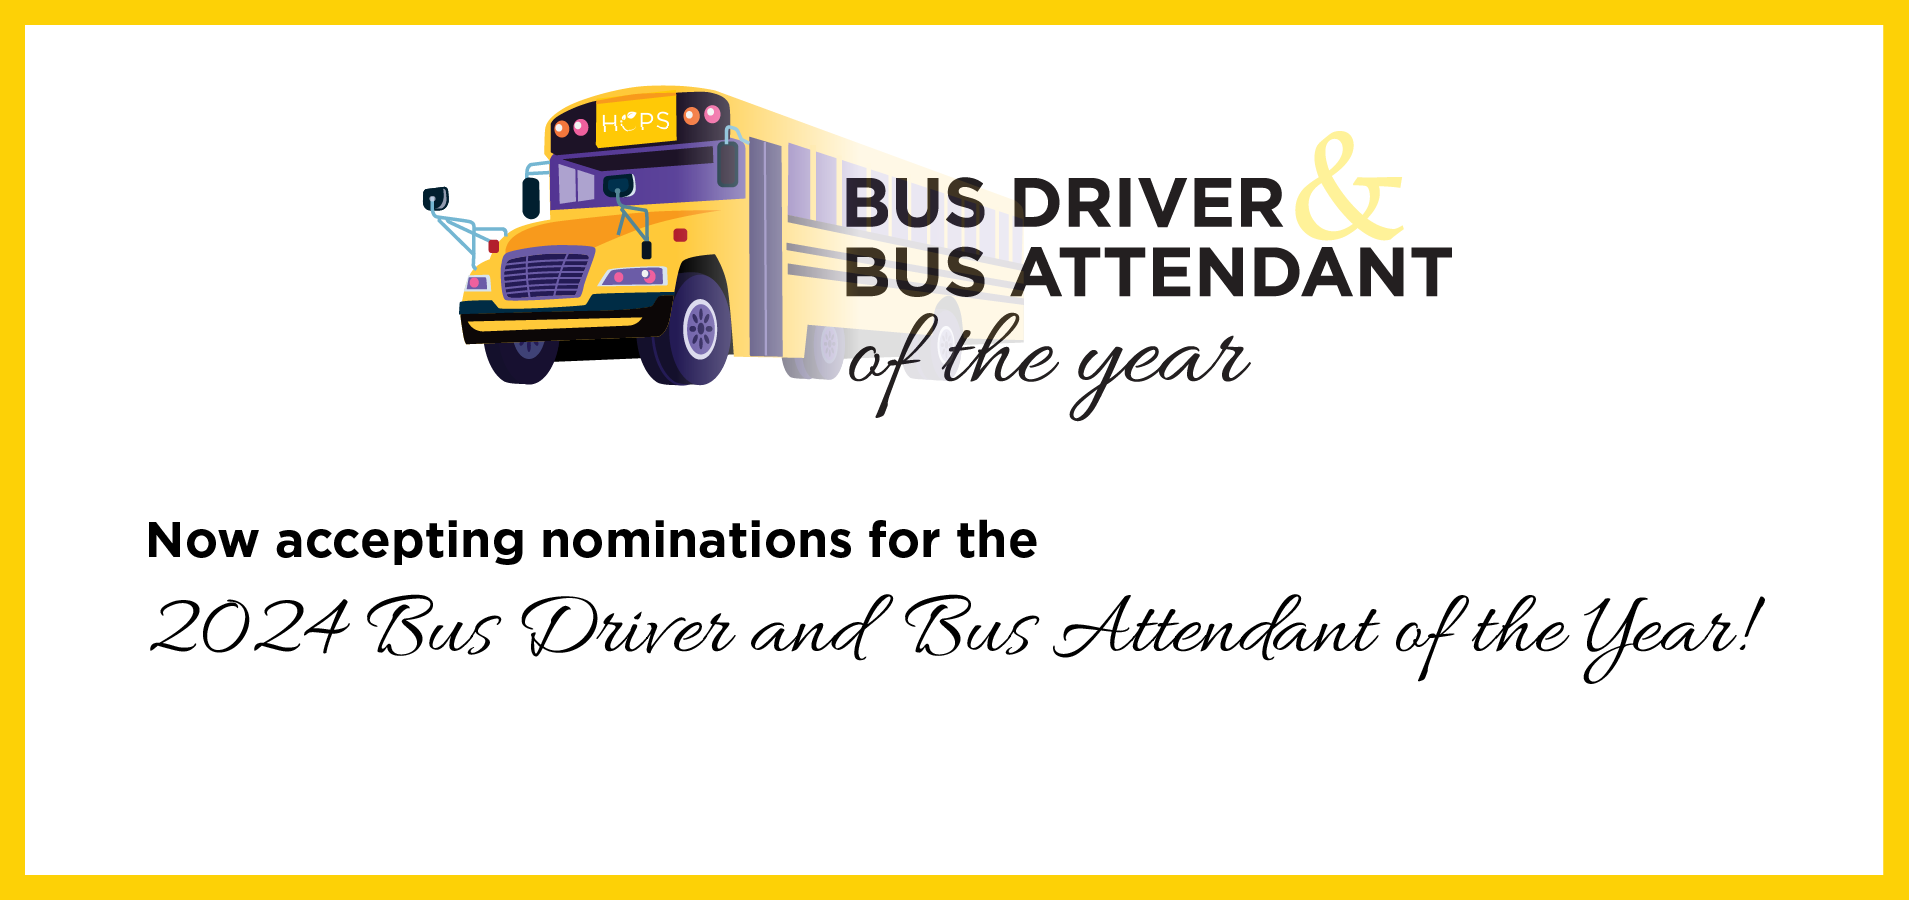 Nominate now for the 2024 Bus Driver and Bus Attendant of the Year!